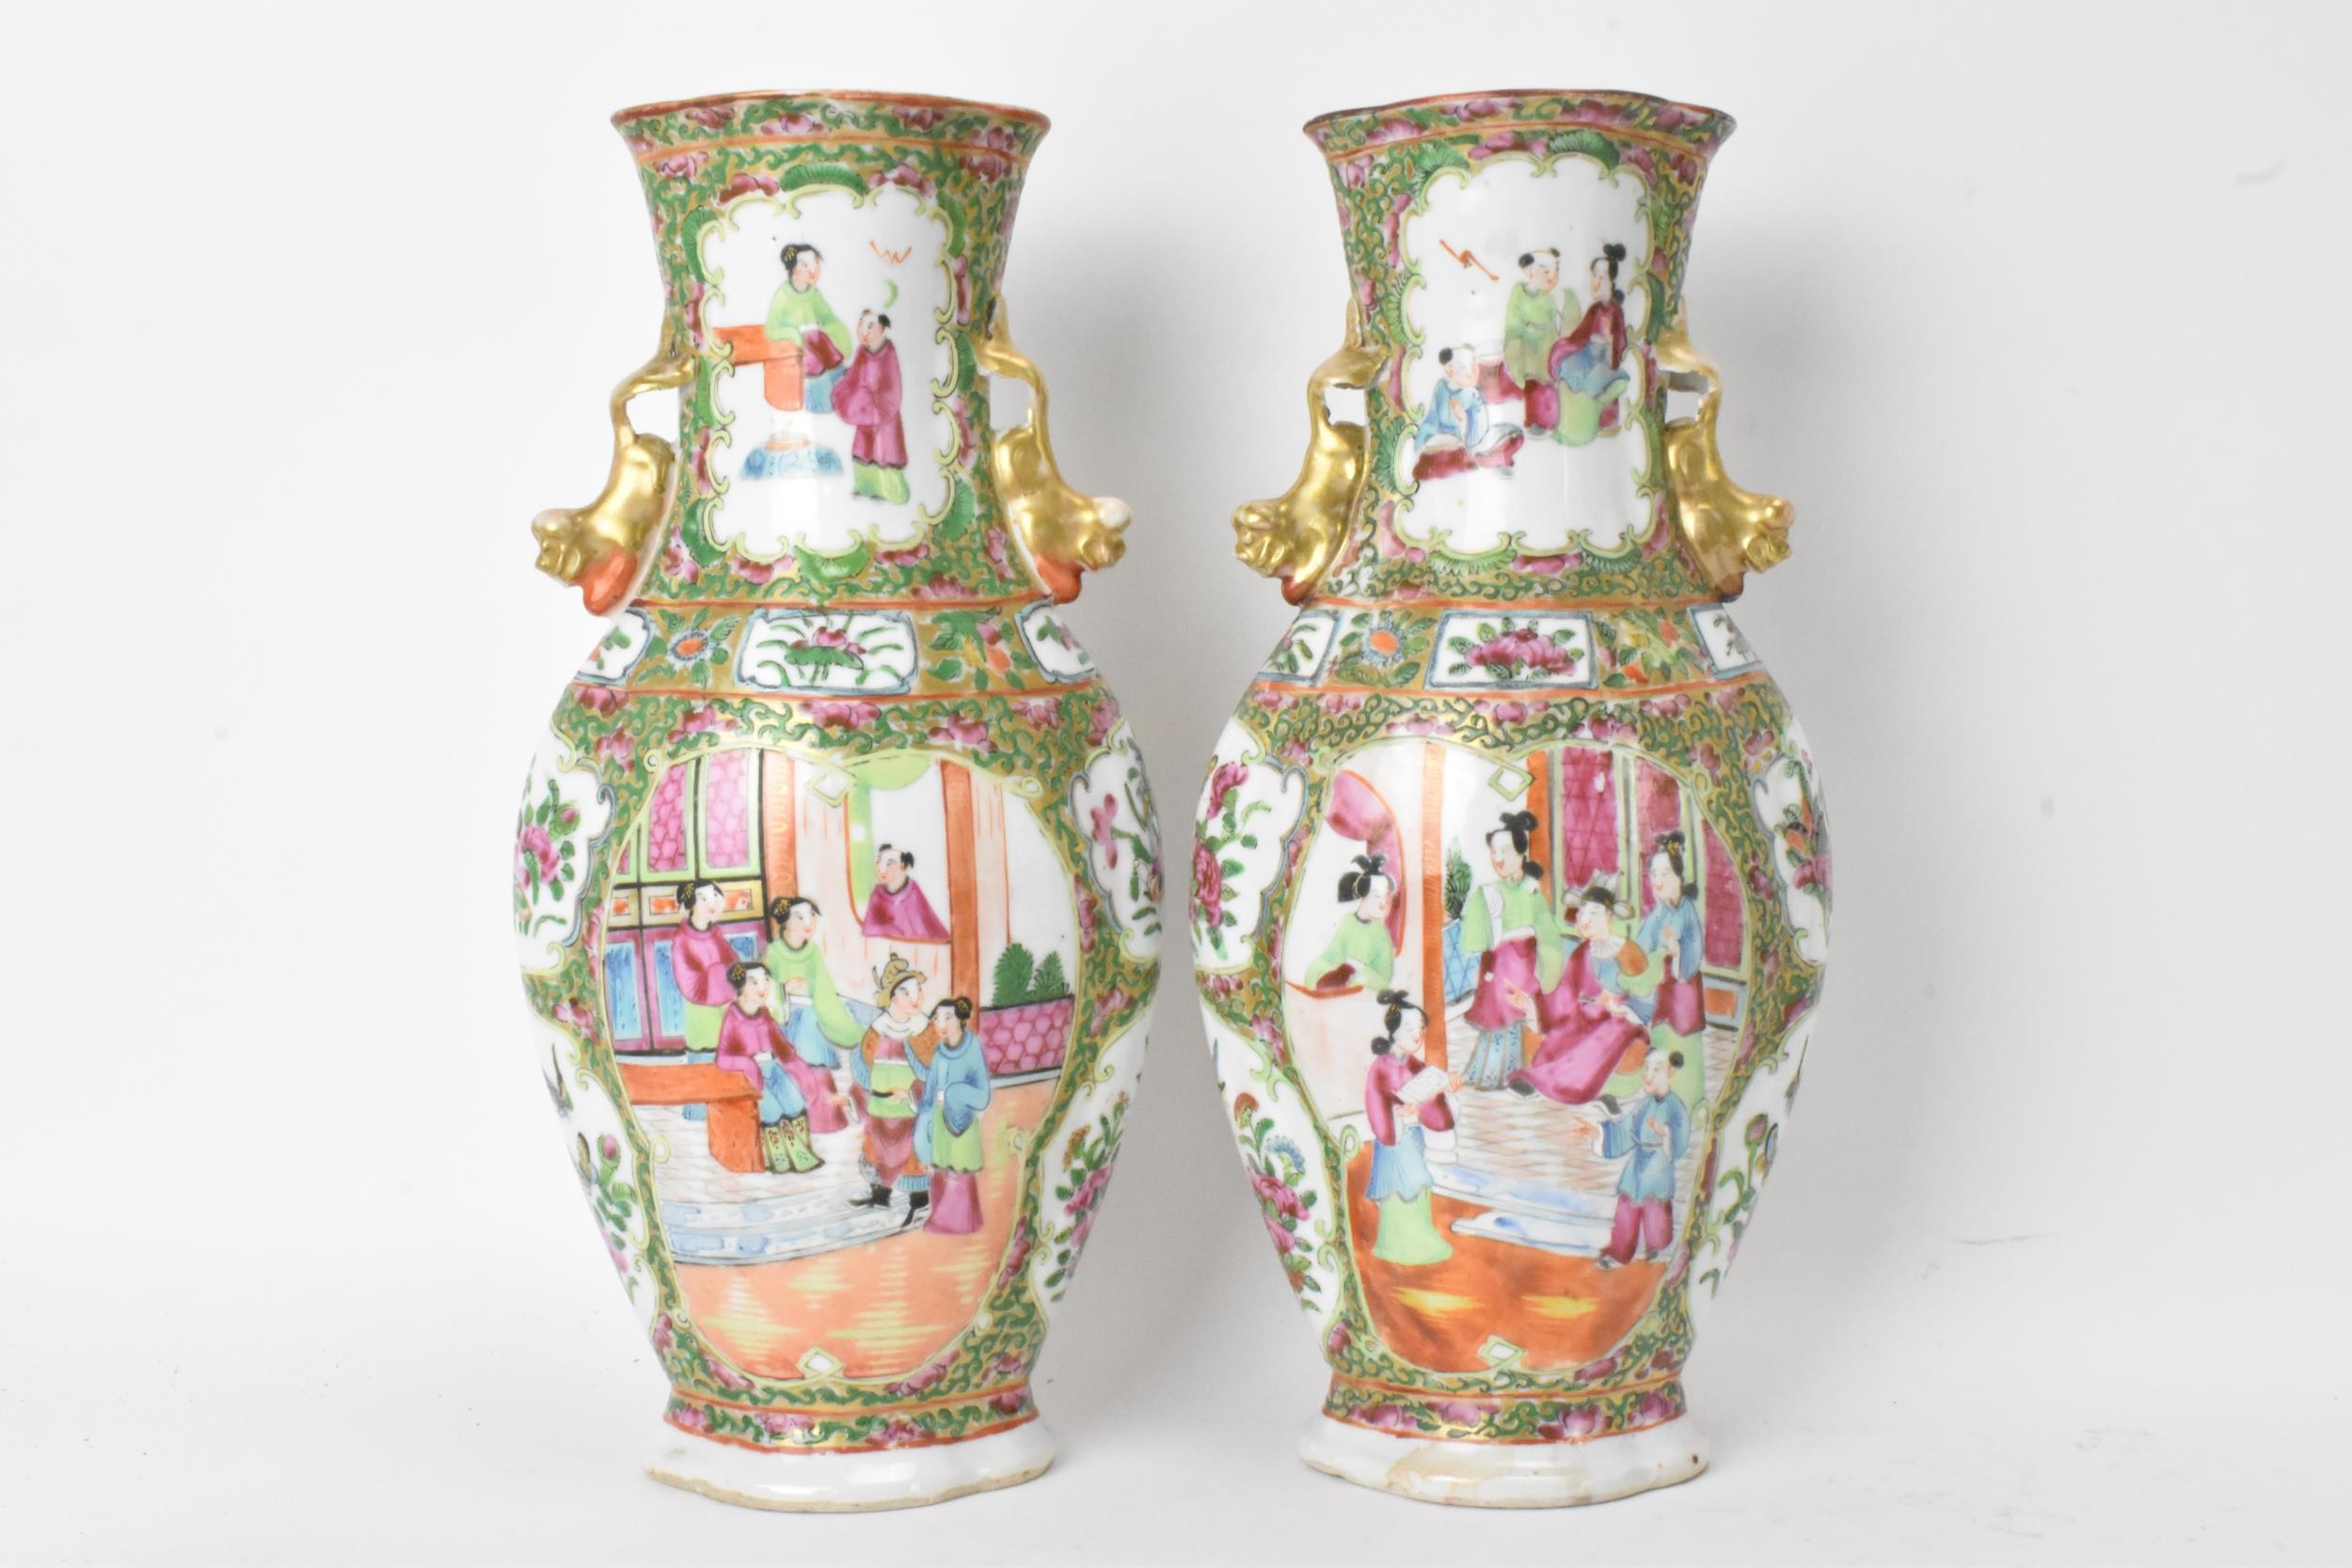 A pair of Chinese export Canton Famille Rose vases, Qing Dynasty, late 19th century, in polychrome